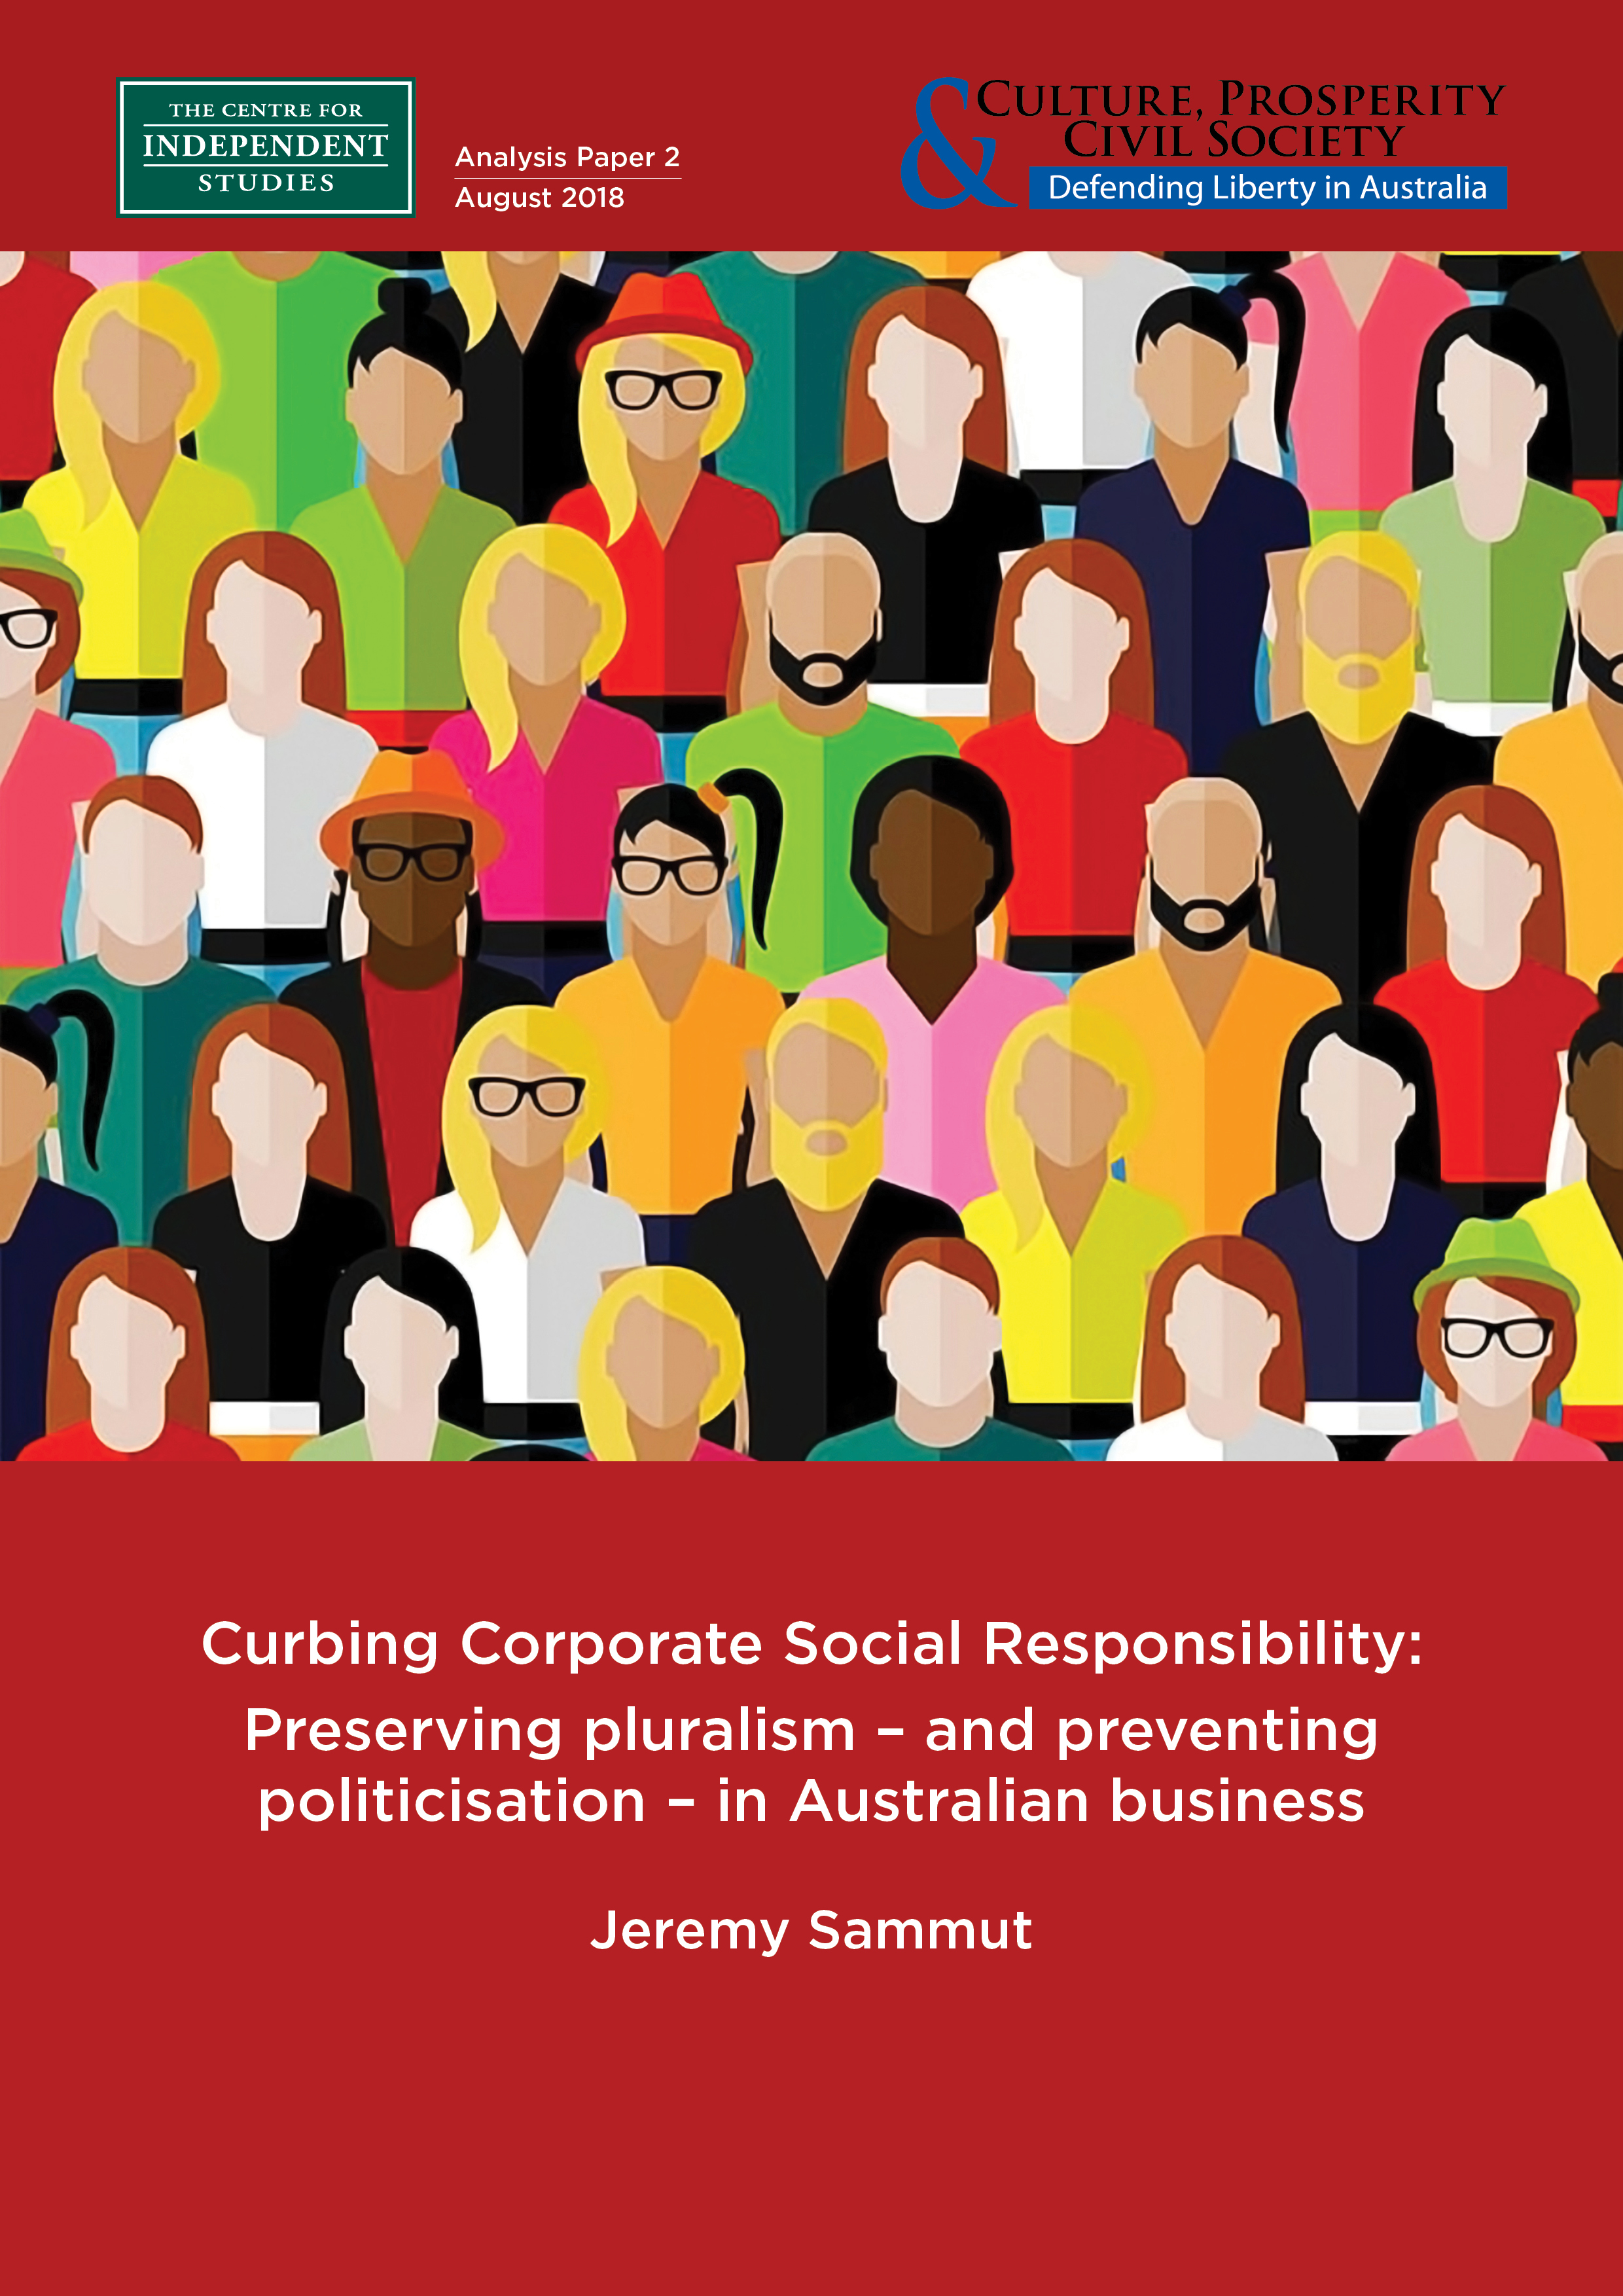 Curbing Corporate Social Responsibility: Preventing Politicisation – and Preserving Pluralism – in Australian Business